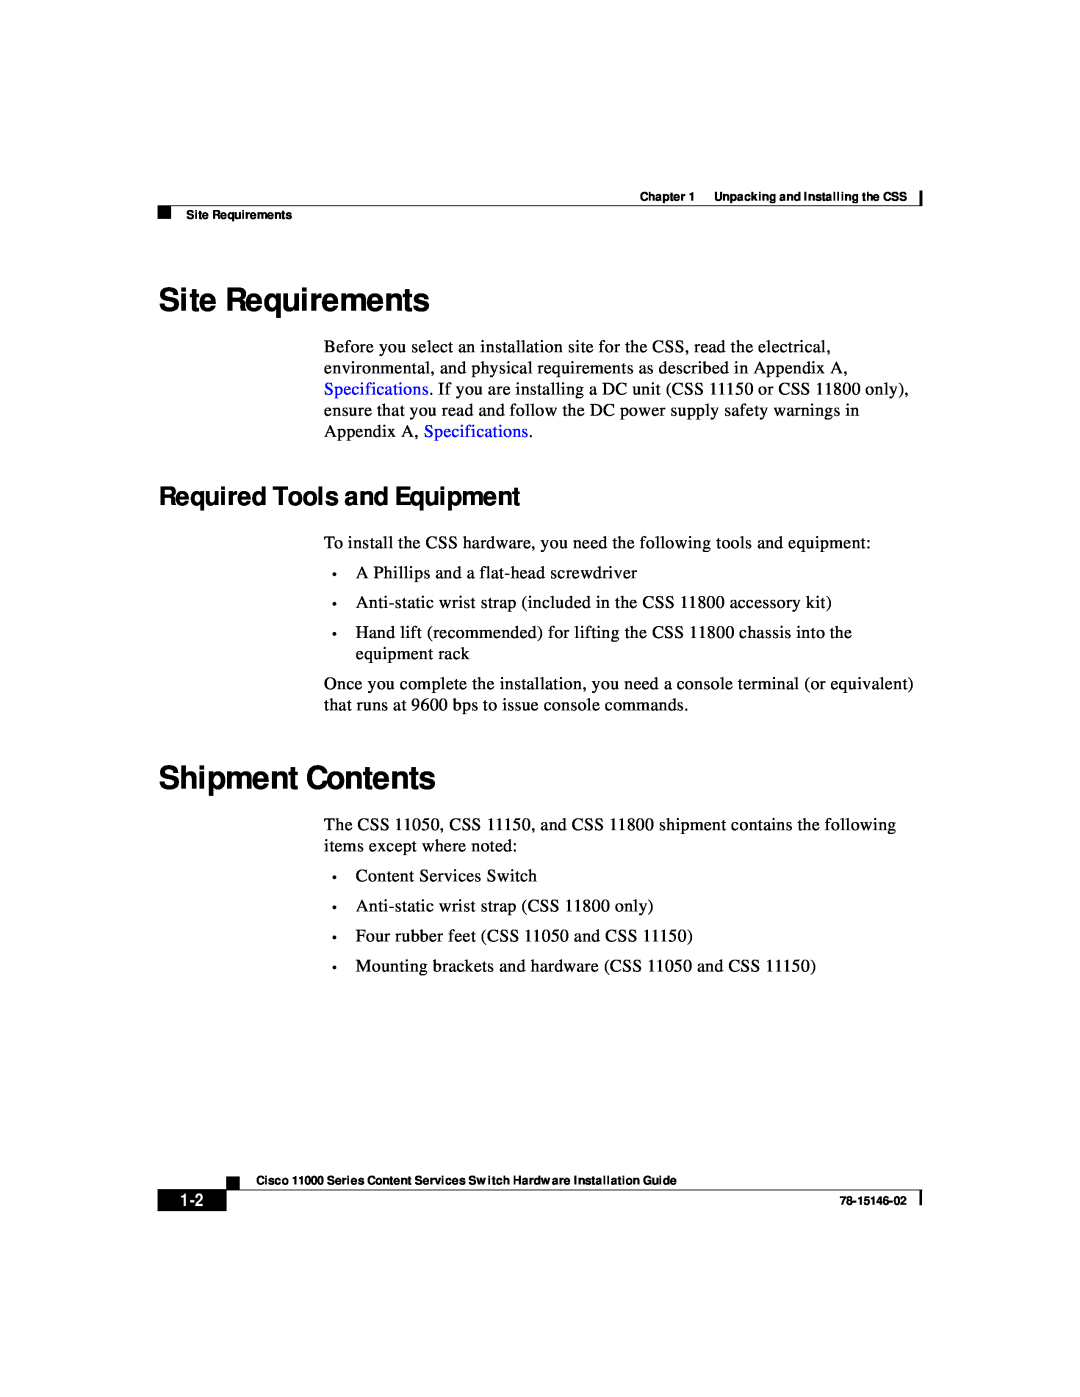 Cisco Systems 11000 Series manual Site Requirements, Shipment Contents, Required Tools and Equipment 